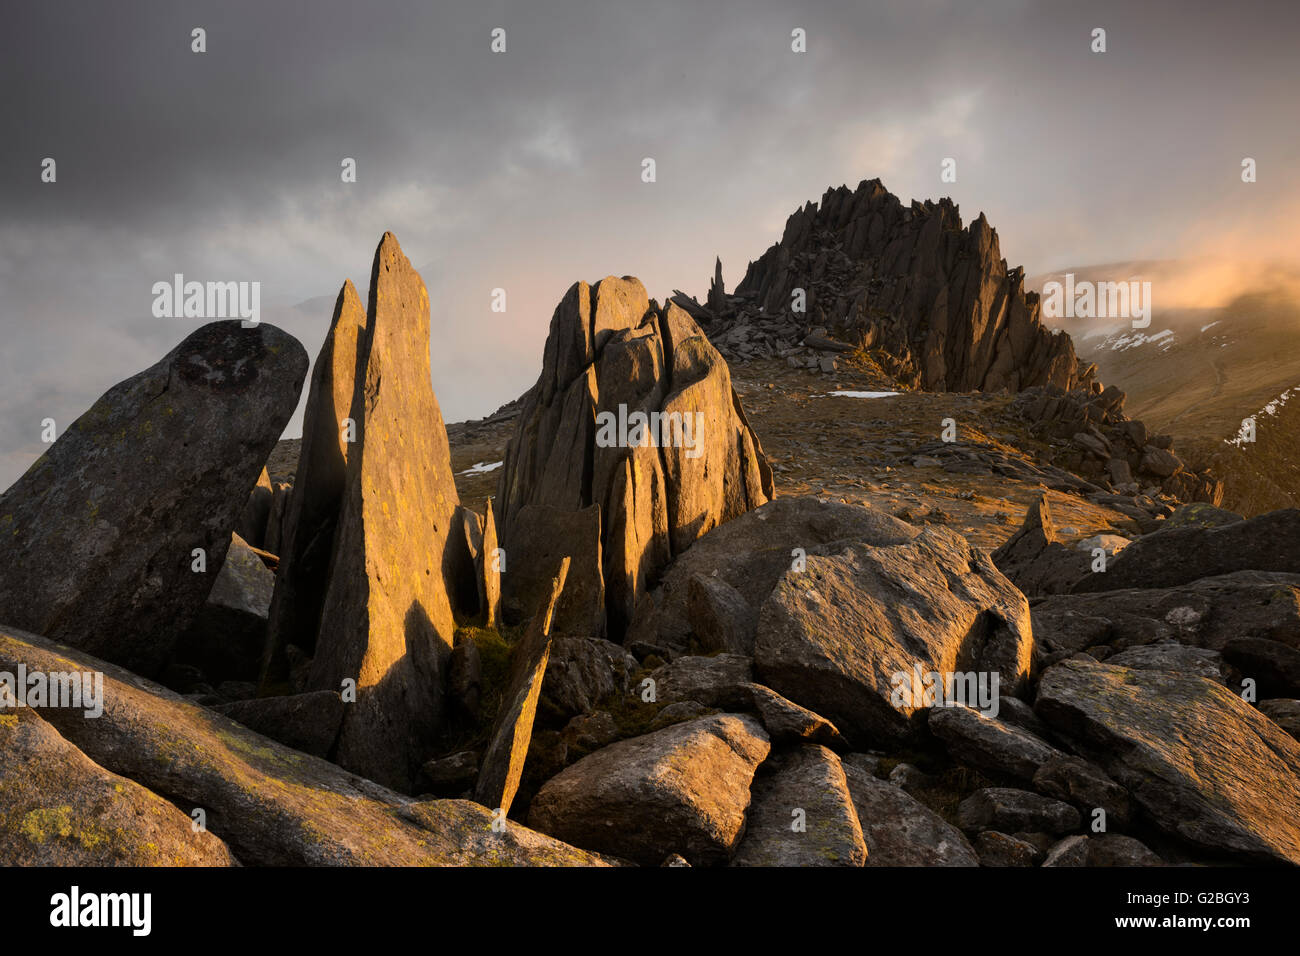 Castell y Gwynt (Castle of the Winds) on Glyder Fach, Snowdonia, dramatically lit at sunset. Stock Photo